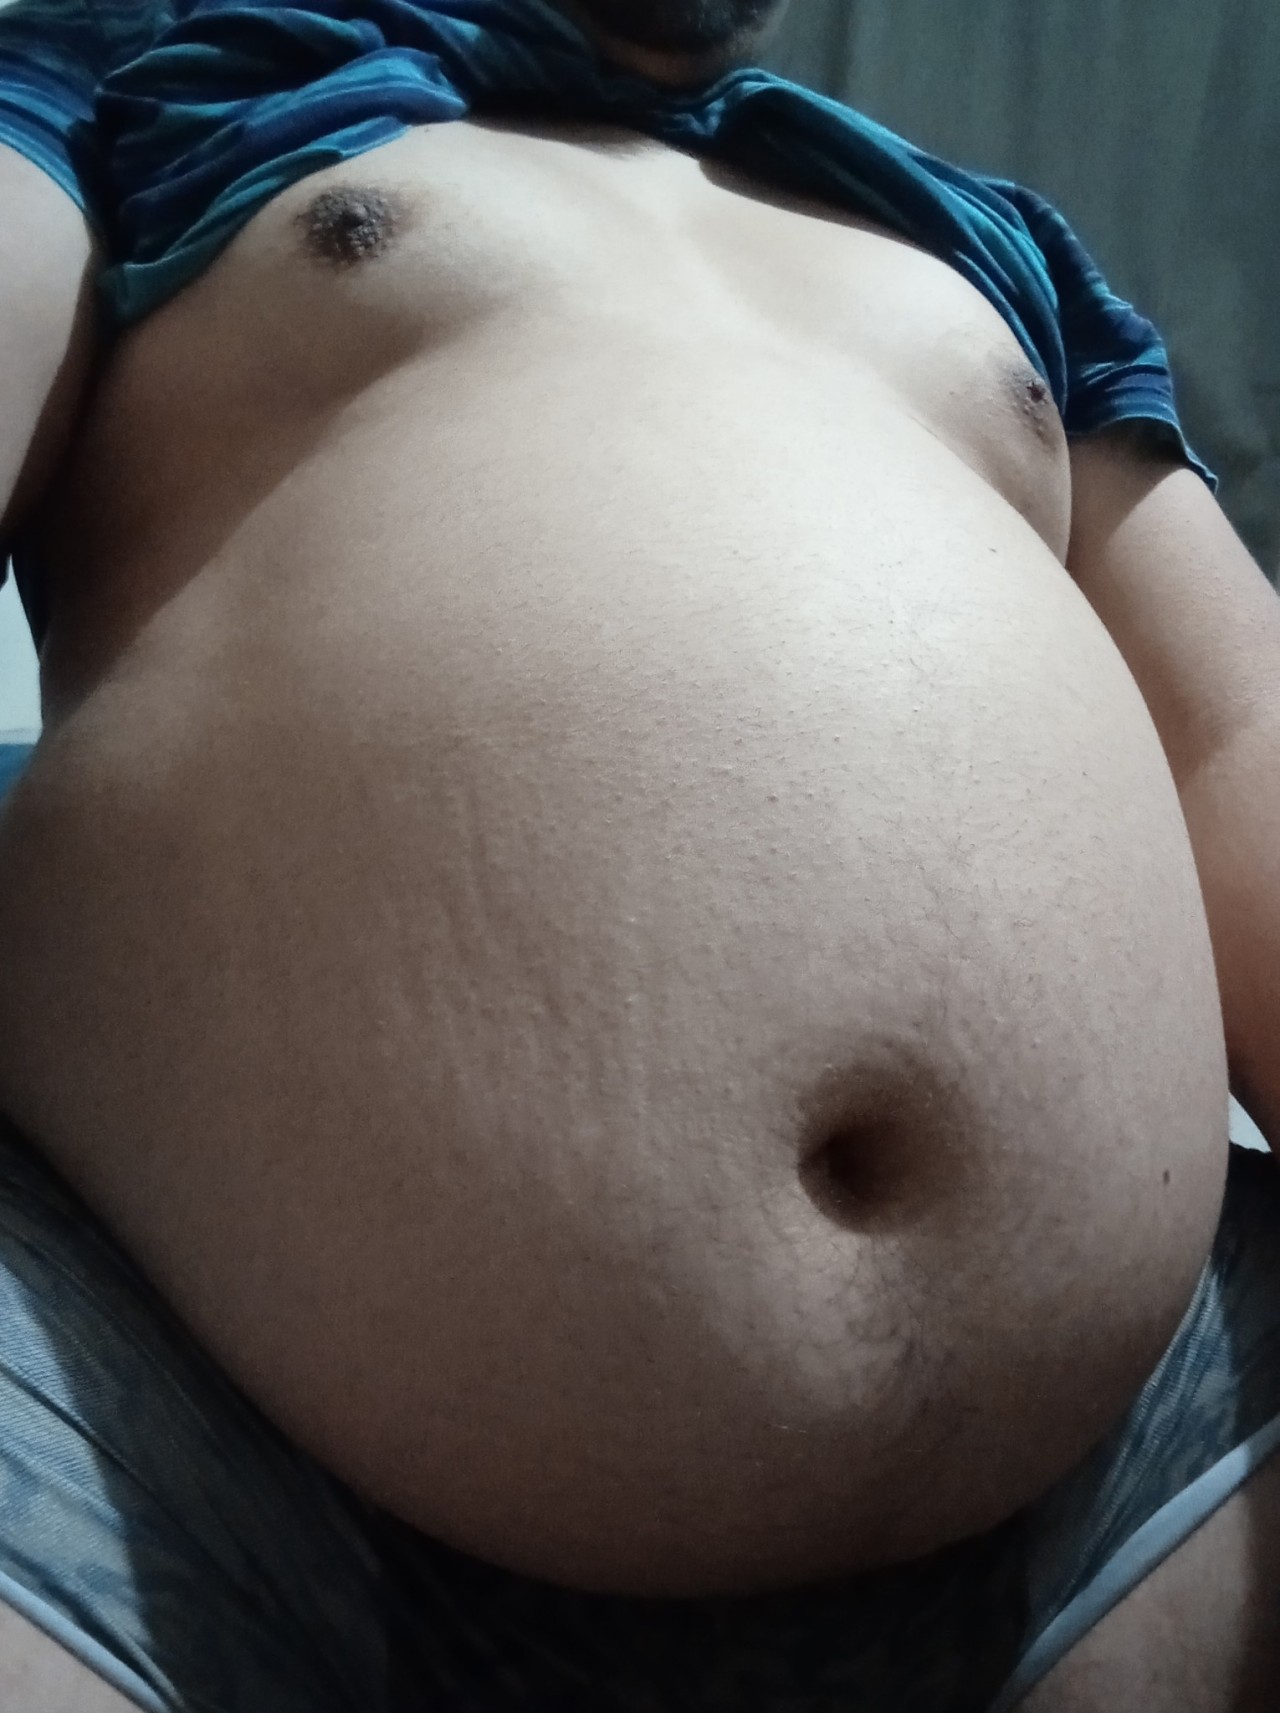 gainerburr:Craving some pizzas and burgers! The need to be a superchub is strong this morning!